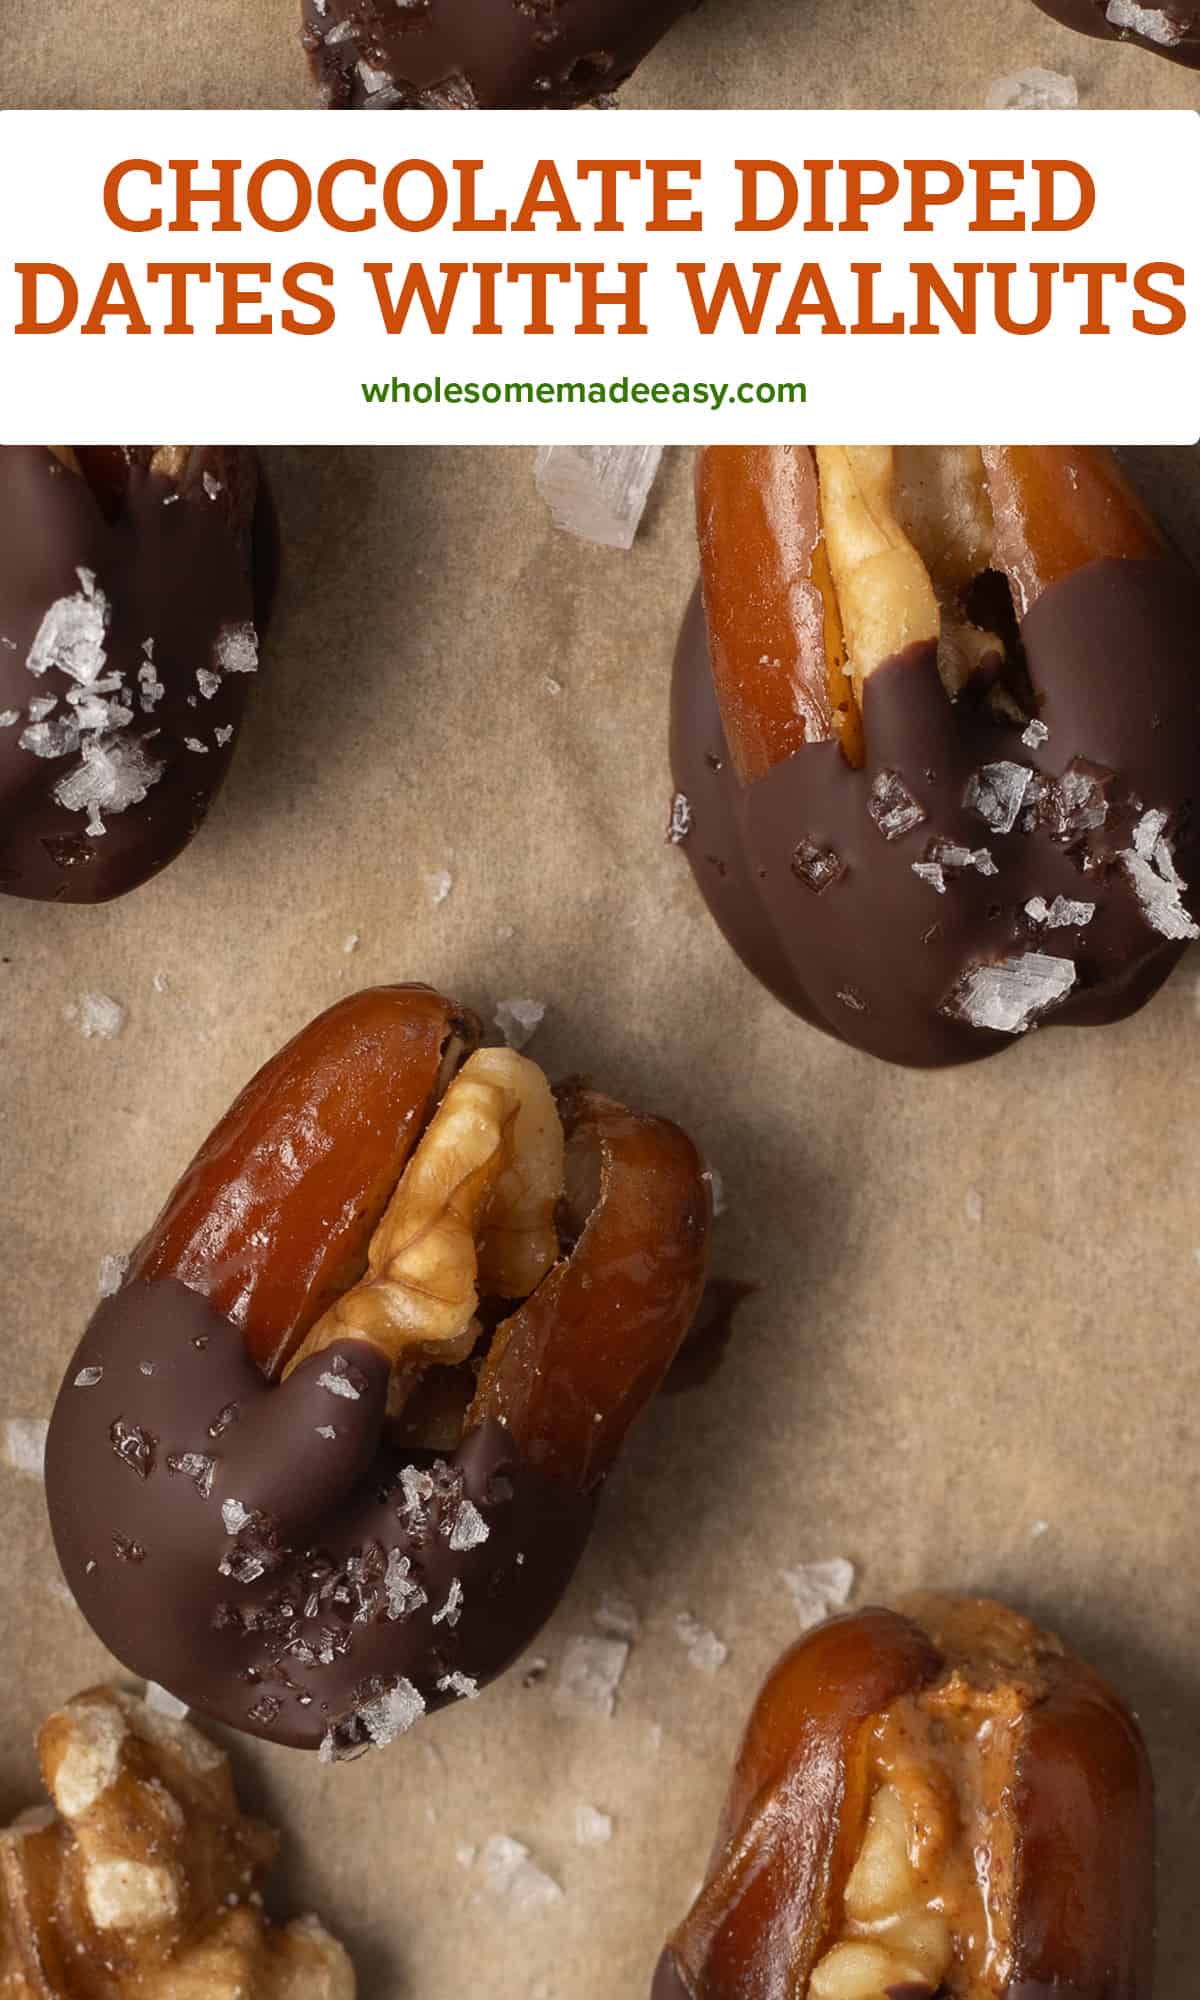 Chocolate dipped dates stuffed with walnuts on parchment paper with text.